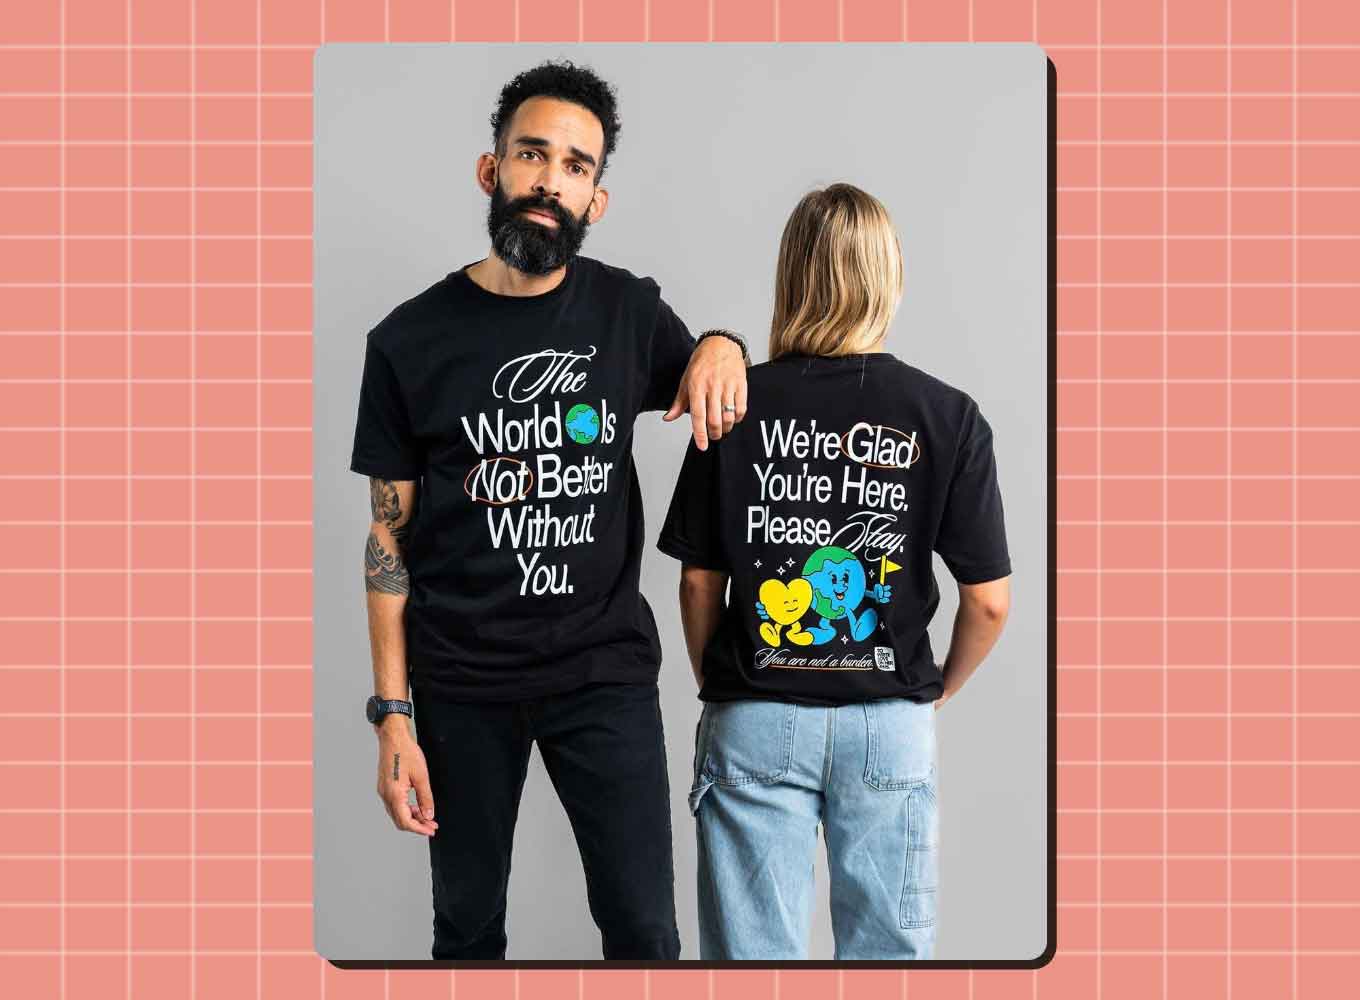 A man and a woman stand side by side, wearing t-shirts that say "The World Is Not Better Without You."